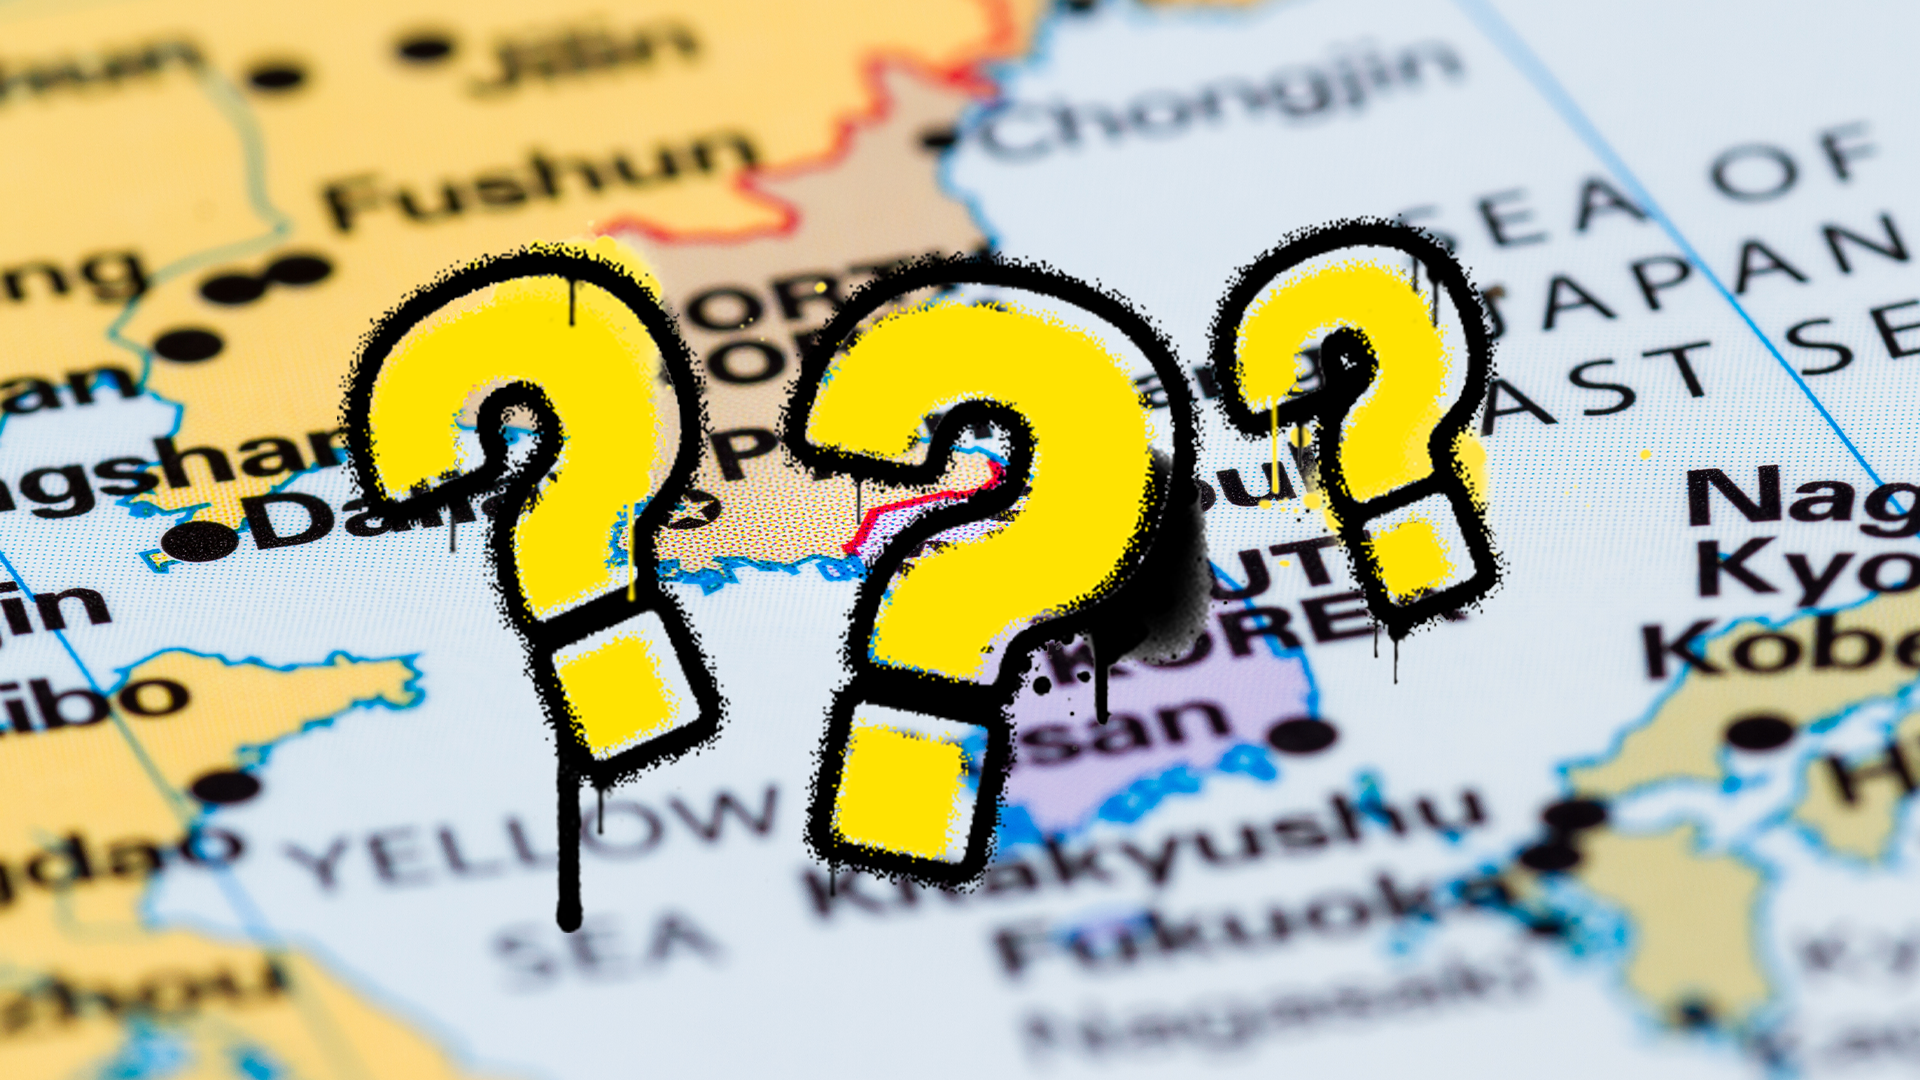 Map of Korea with question marks